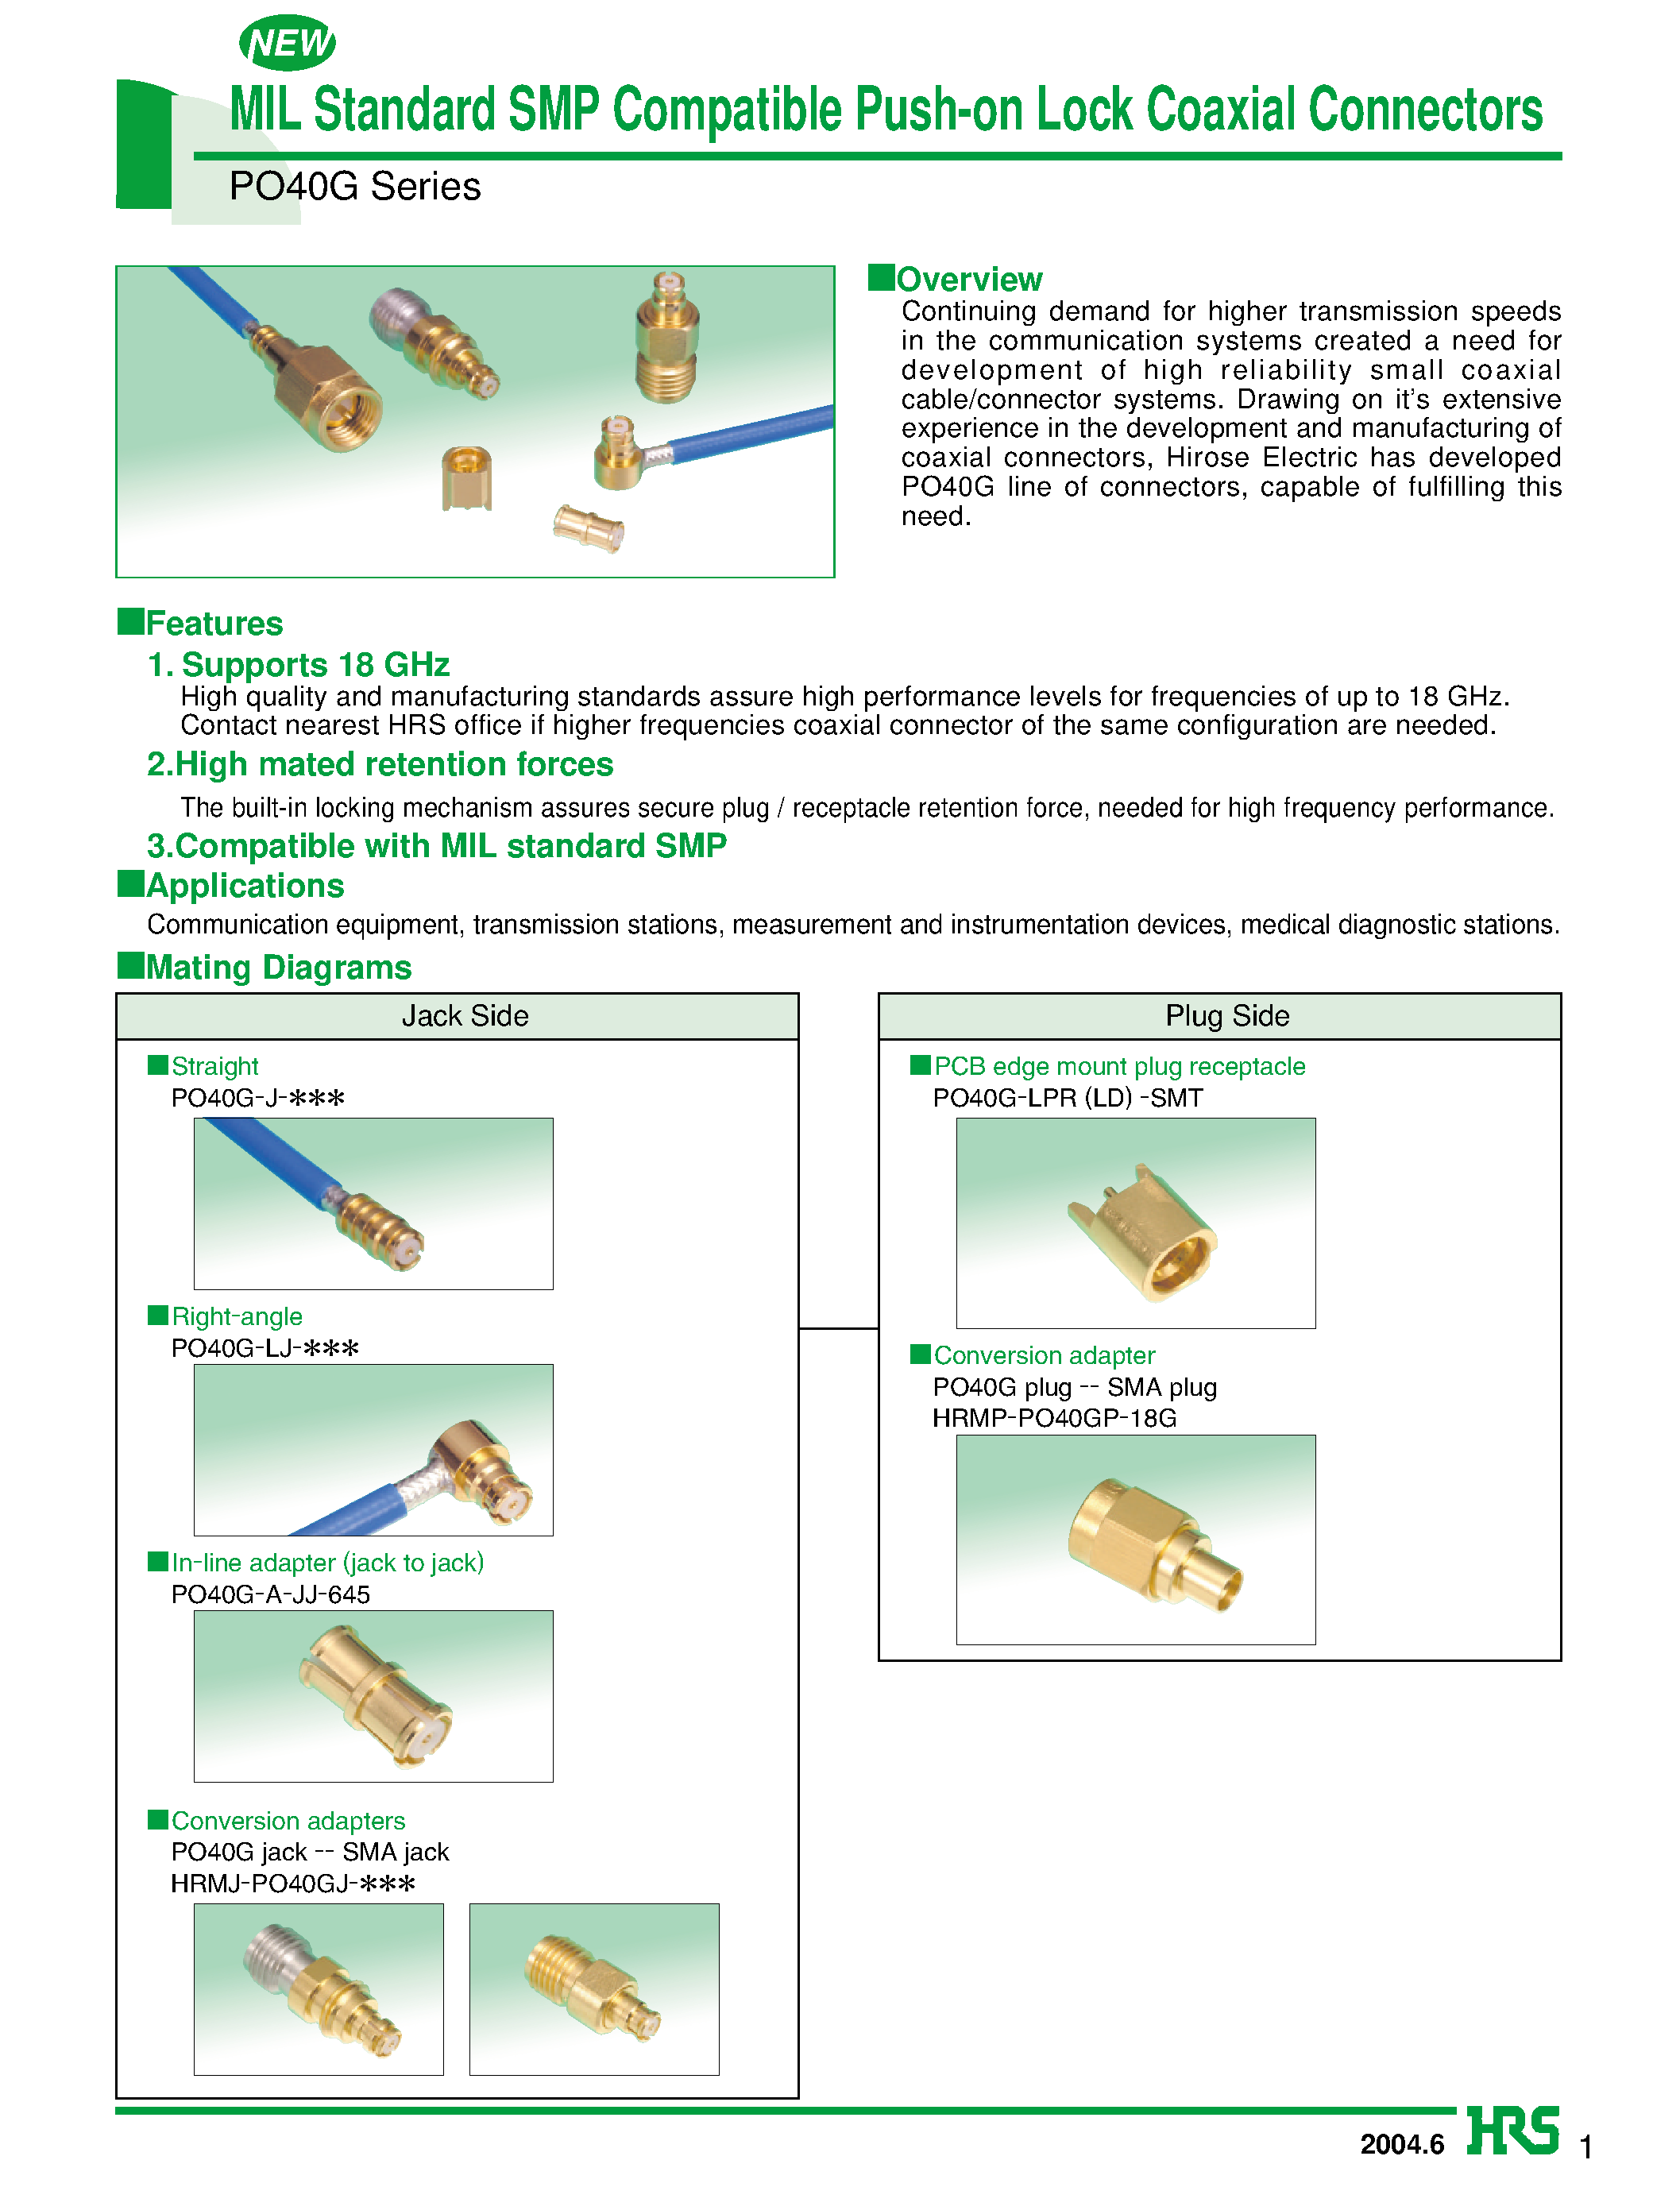 Datasheet PO40G-J-N1 - MIL Standard SMP Compatible Push-on Lock Coaxial Connectors page 1